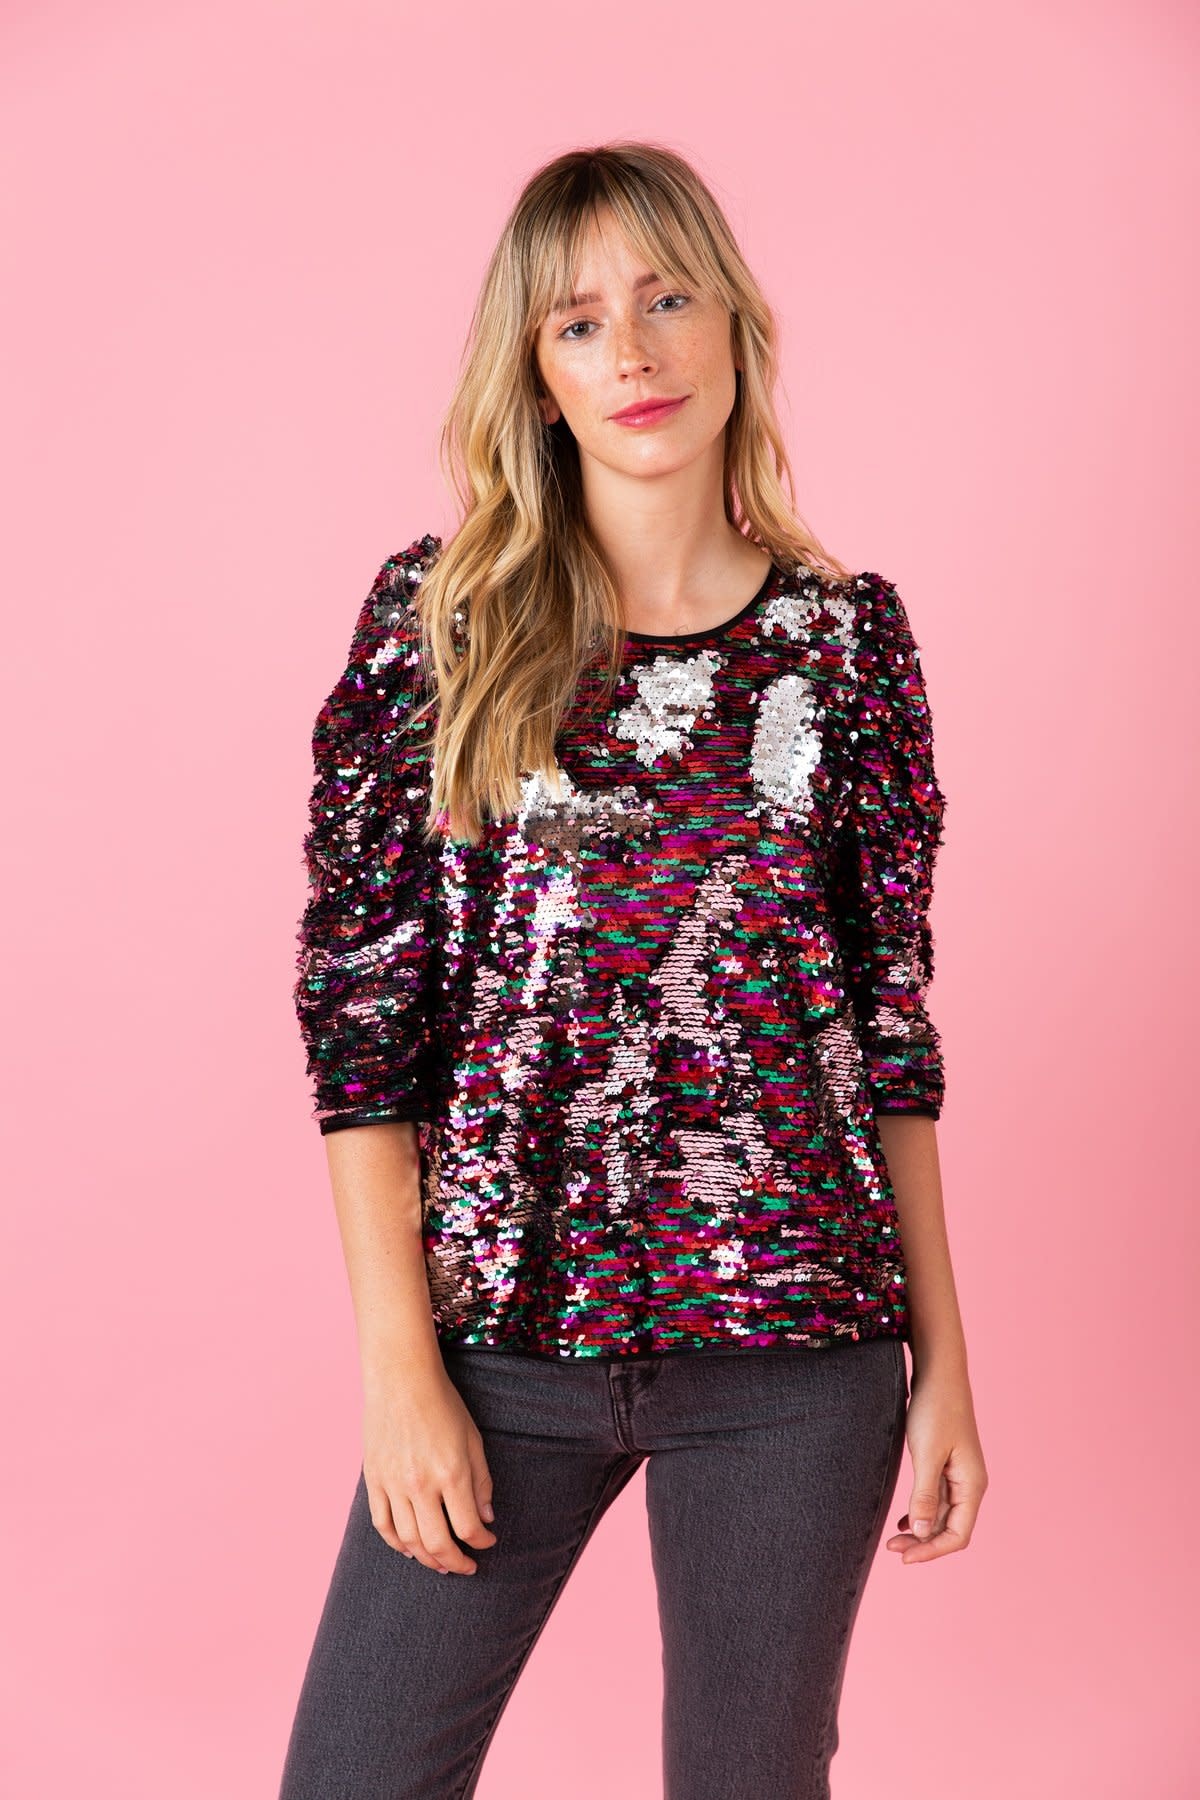 Crosby By Mollie Burch Lurie Top Chromatic Sequin